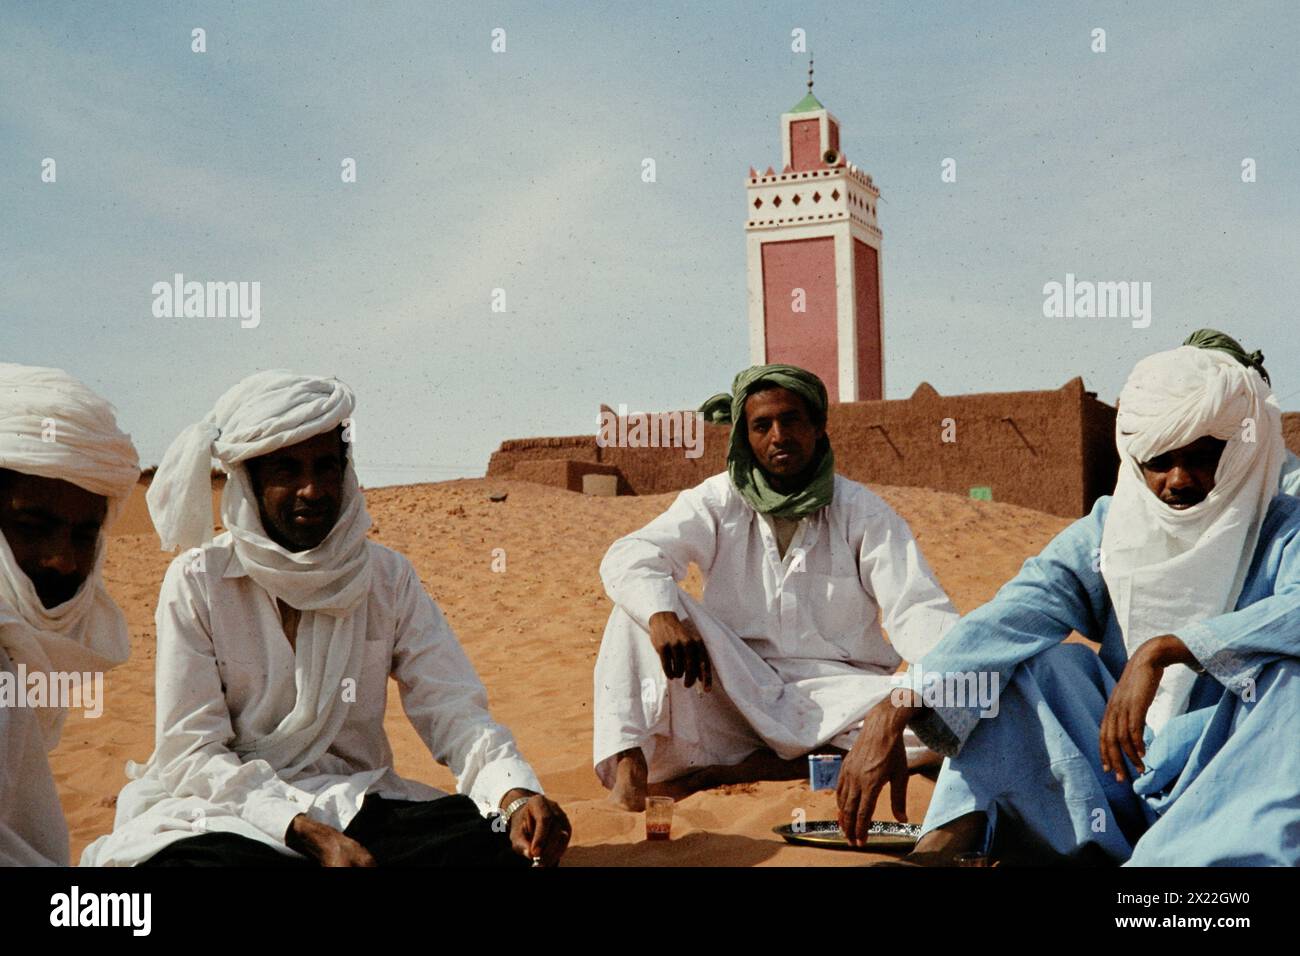 Men in traditional Tuareg clothing with facial veils sit in the sand in front of a mosque in the Algerian oasis city of Ain Salah. Stock Photo